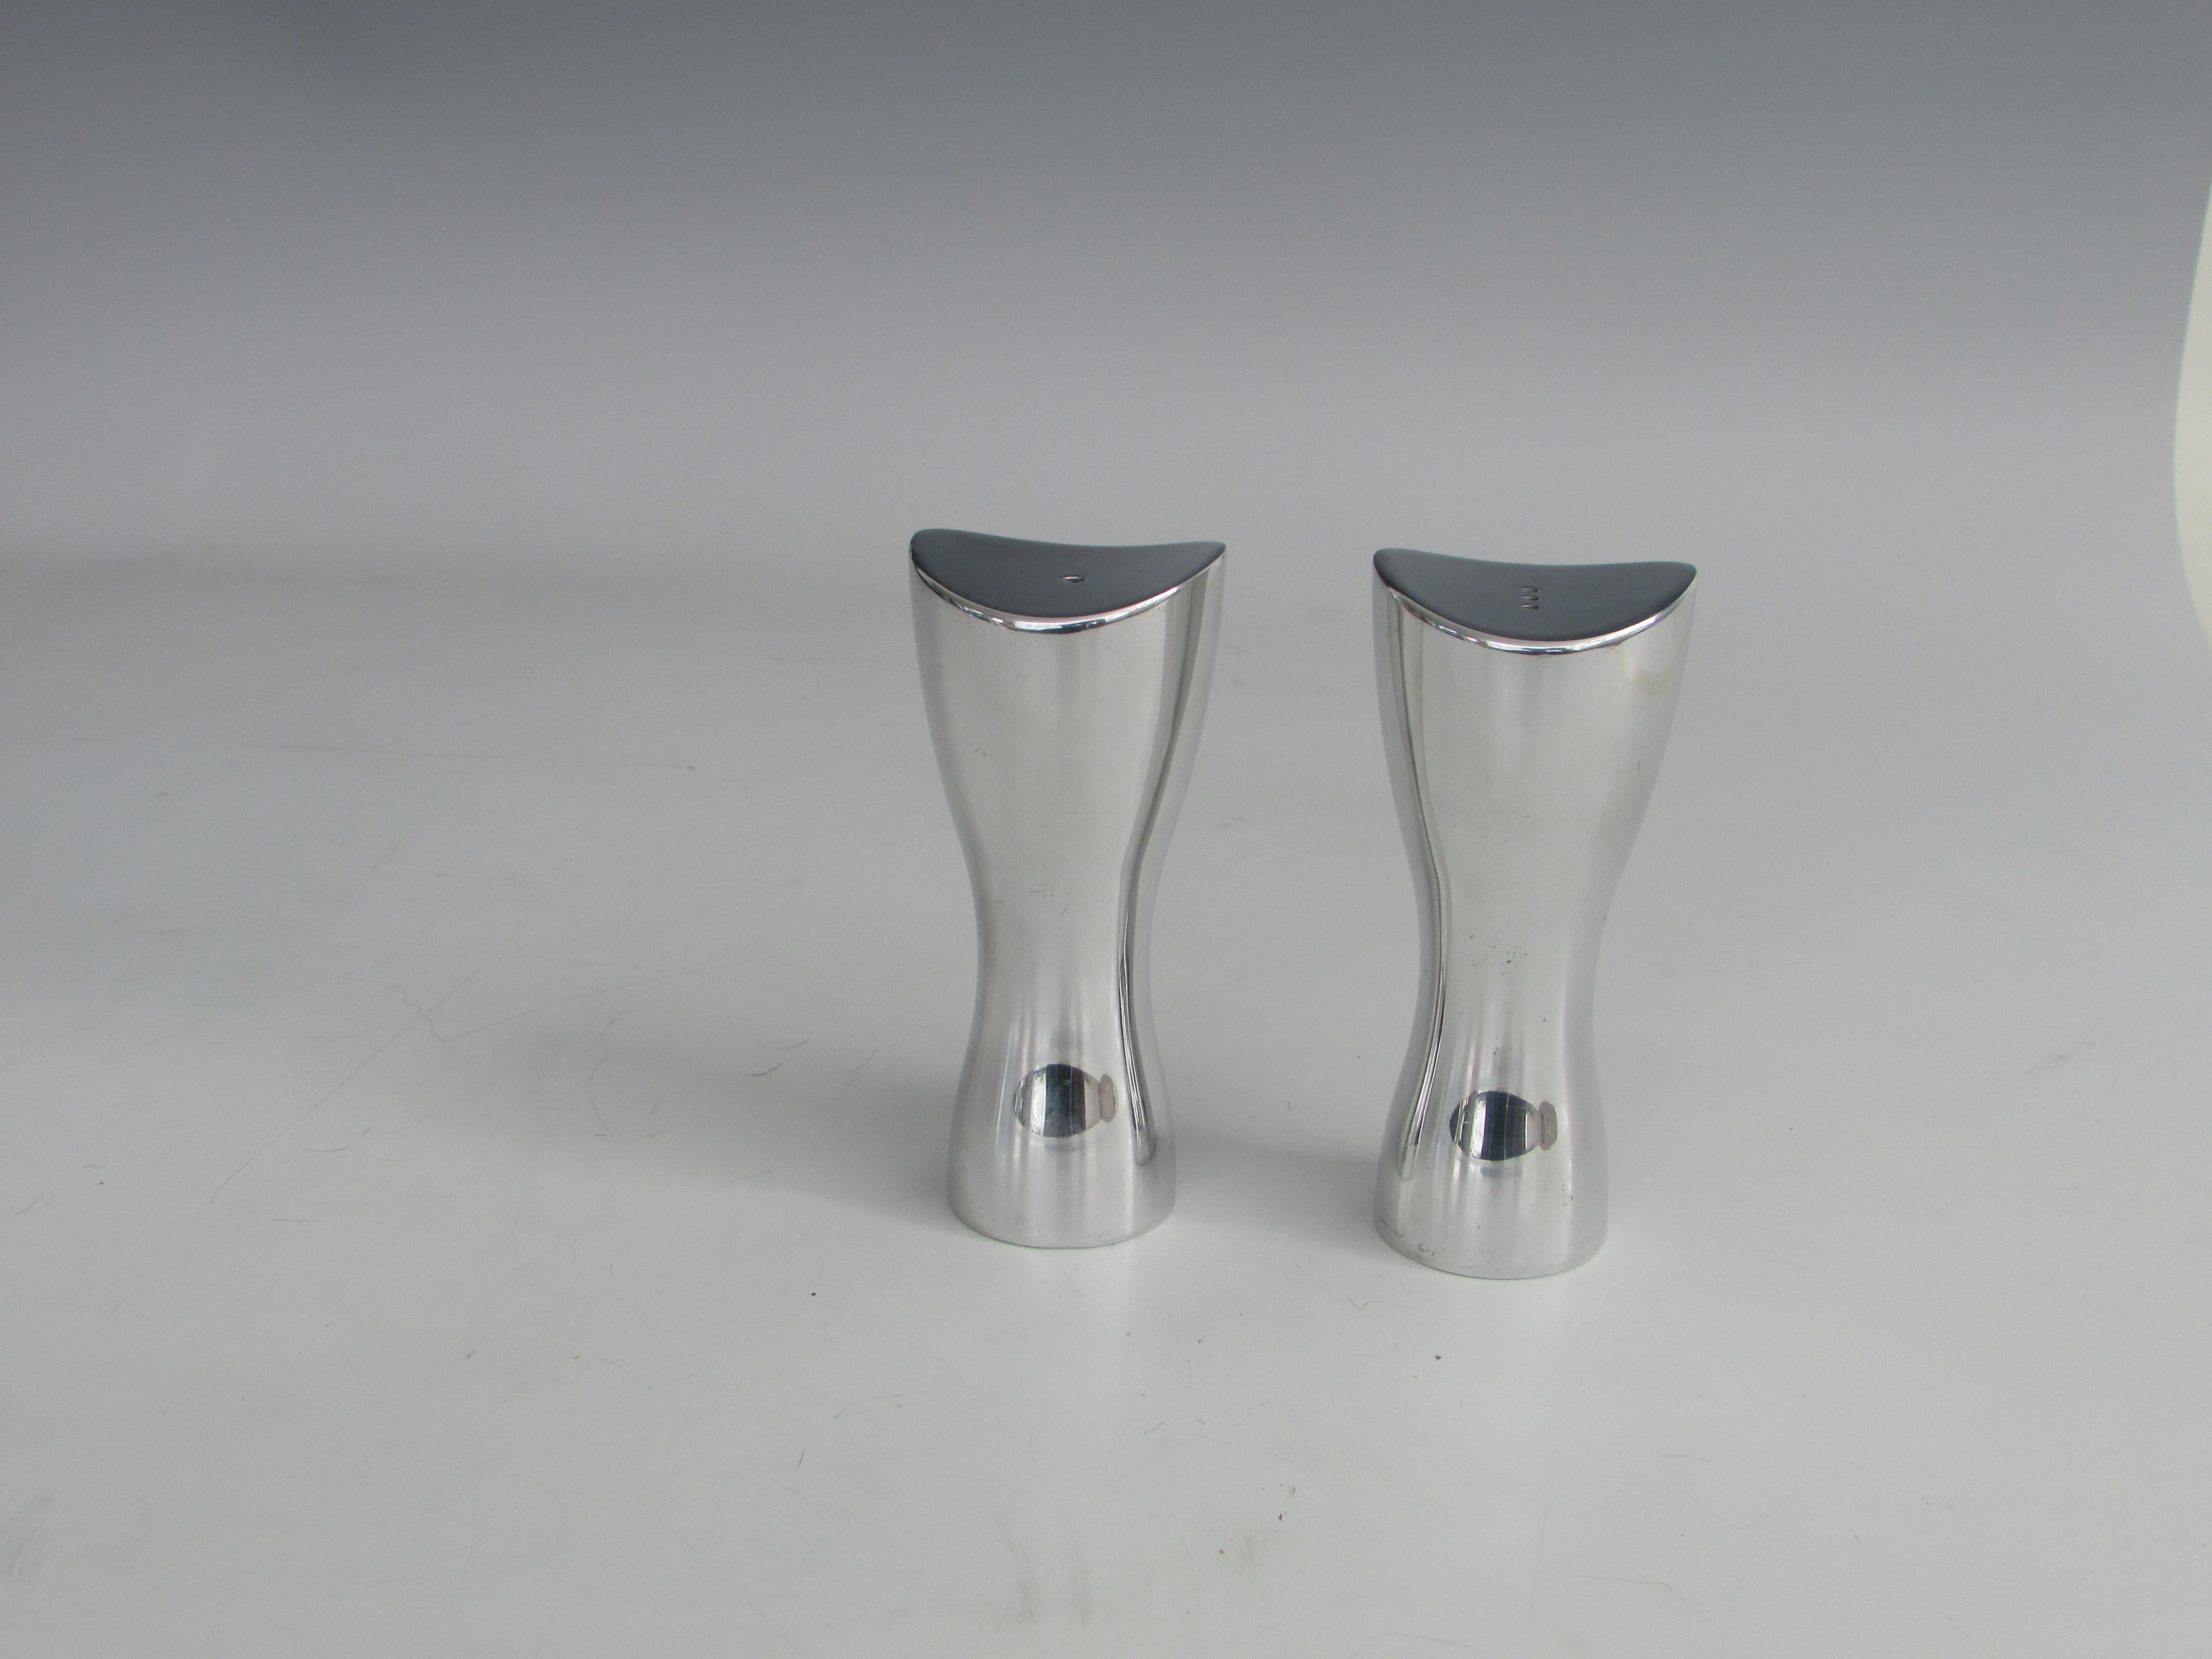 Pair of polished aluminum stylized hour glass form salt pepper shakers. Marked with Nambe Studio label.